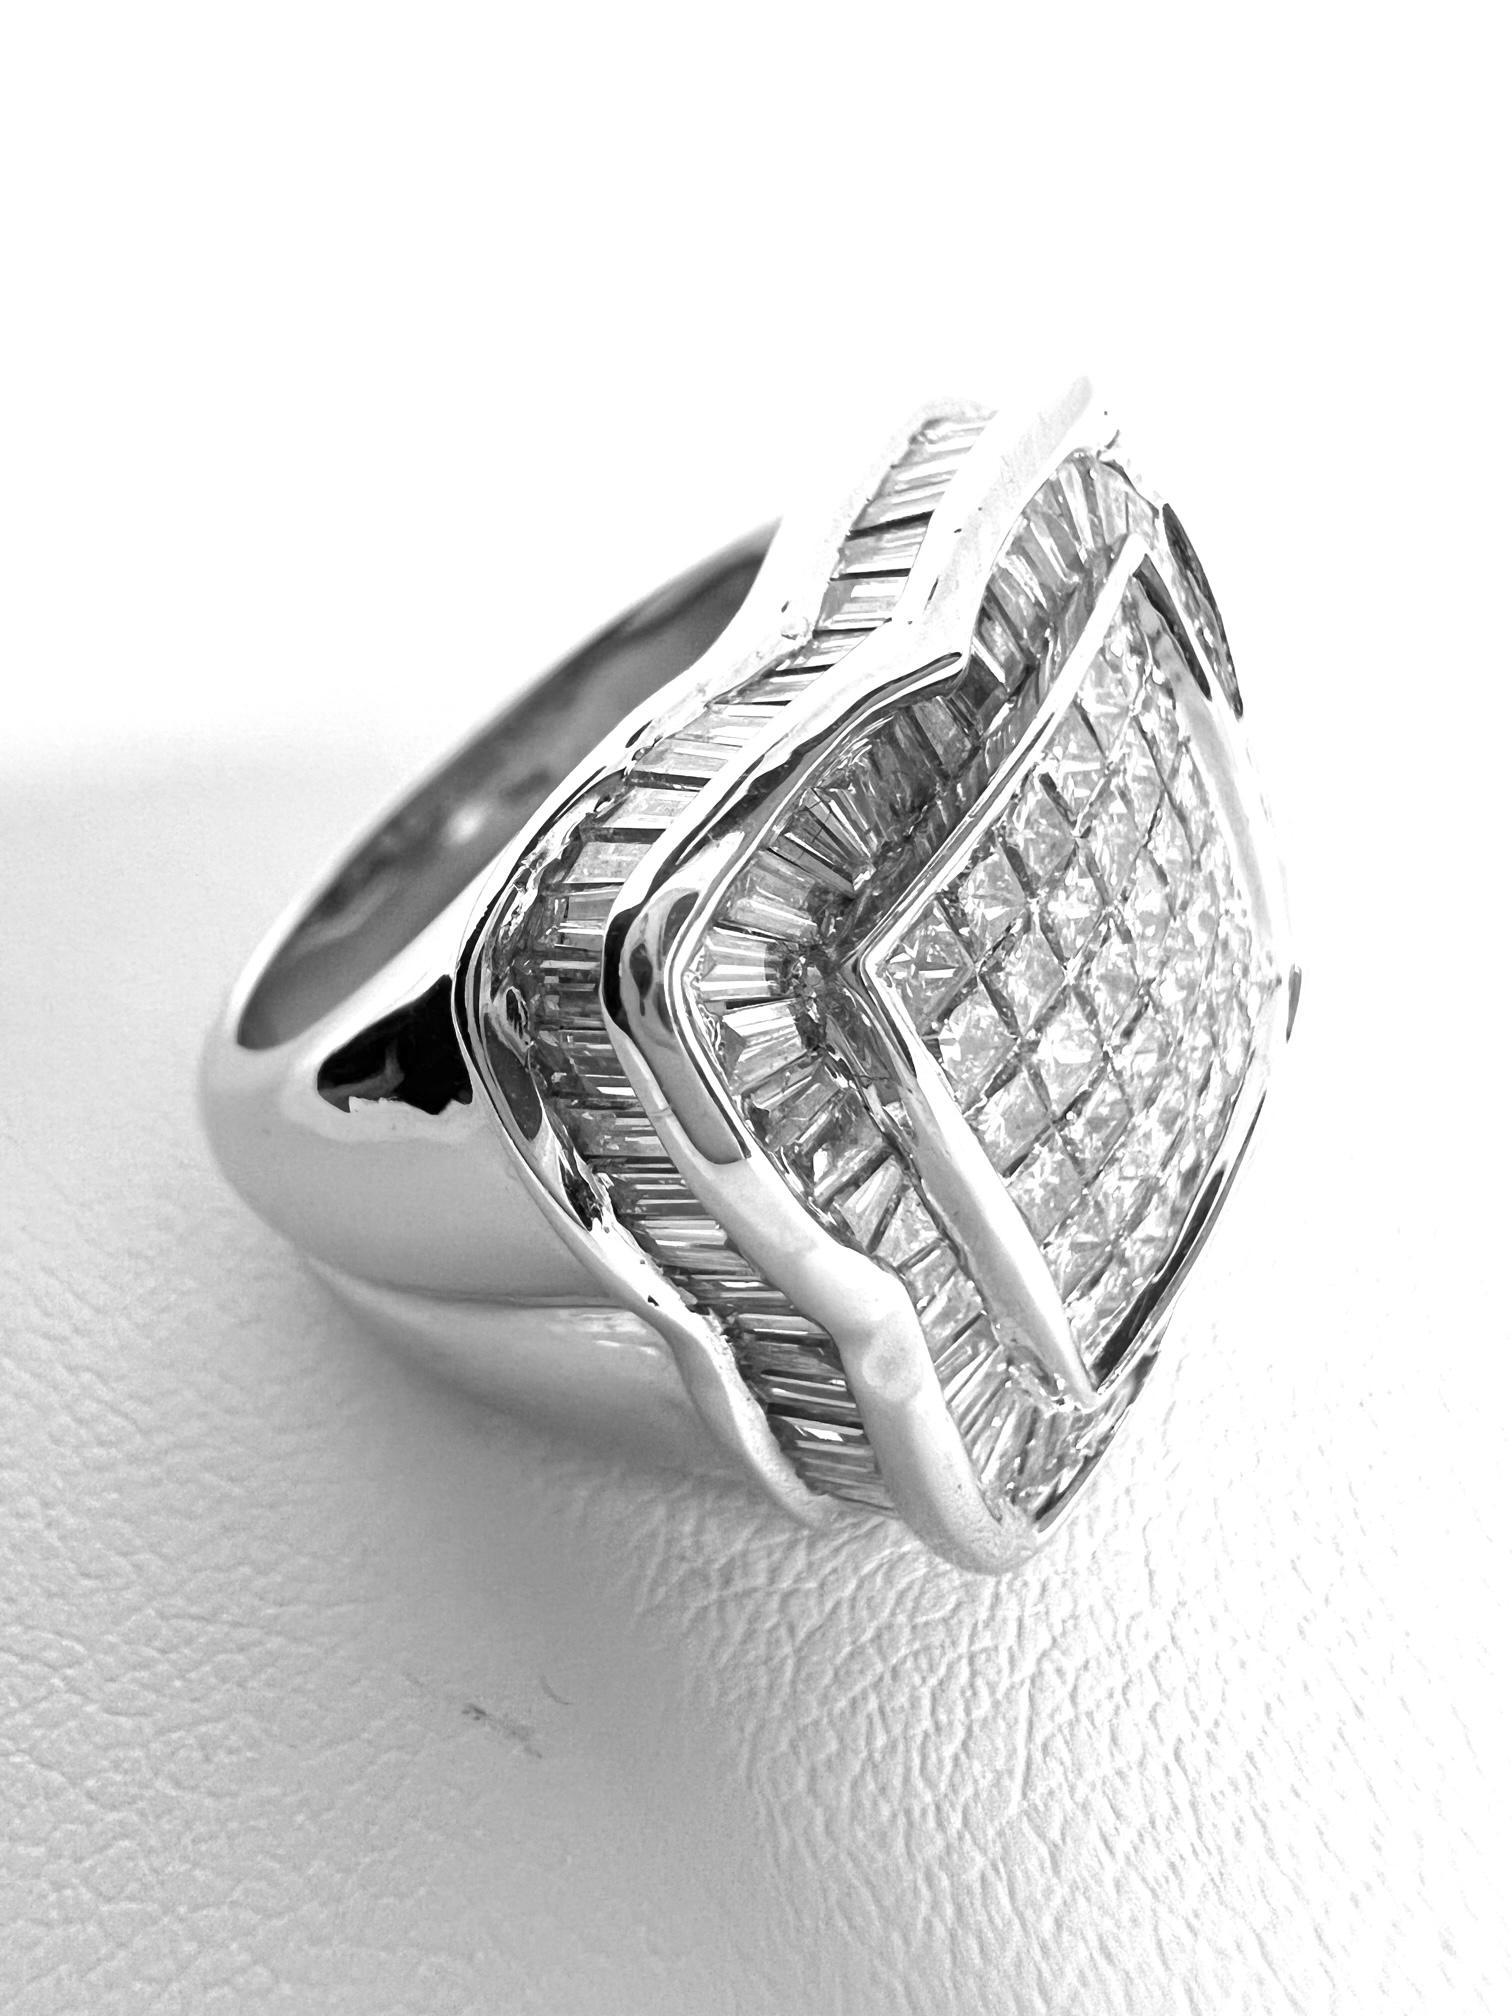 Thomas Leyser is renowned for his contemporary jewellery designs utilizing fine gemstones.

Ring in 18k white gold 17,5gr. with diamonds, princess, baguettes and tapez, I/SI, 3,20cts..

Ringsize 54 (6,8). Sizeable.